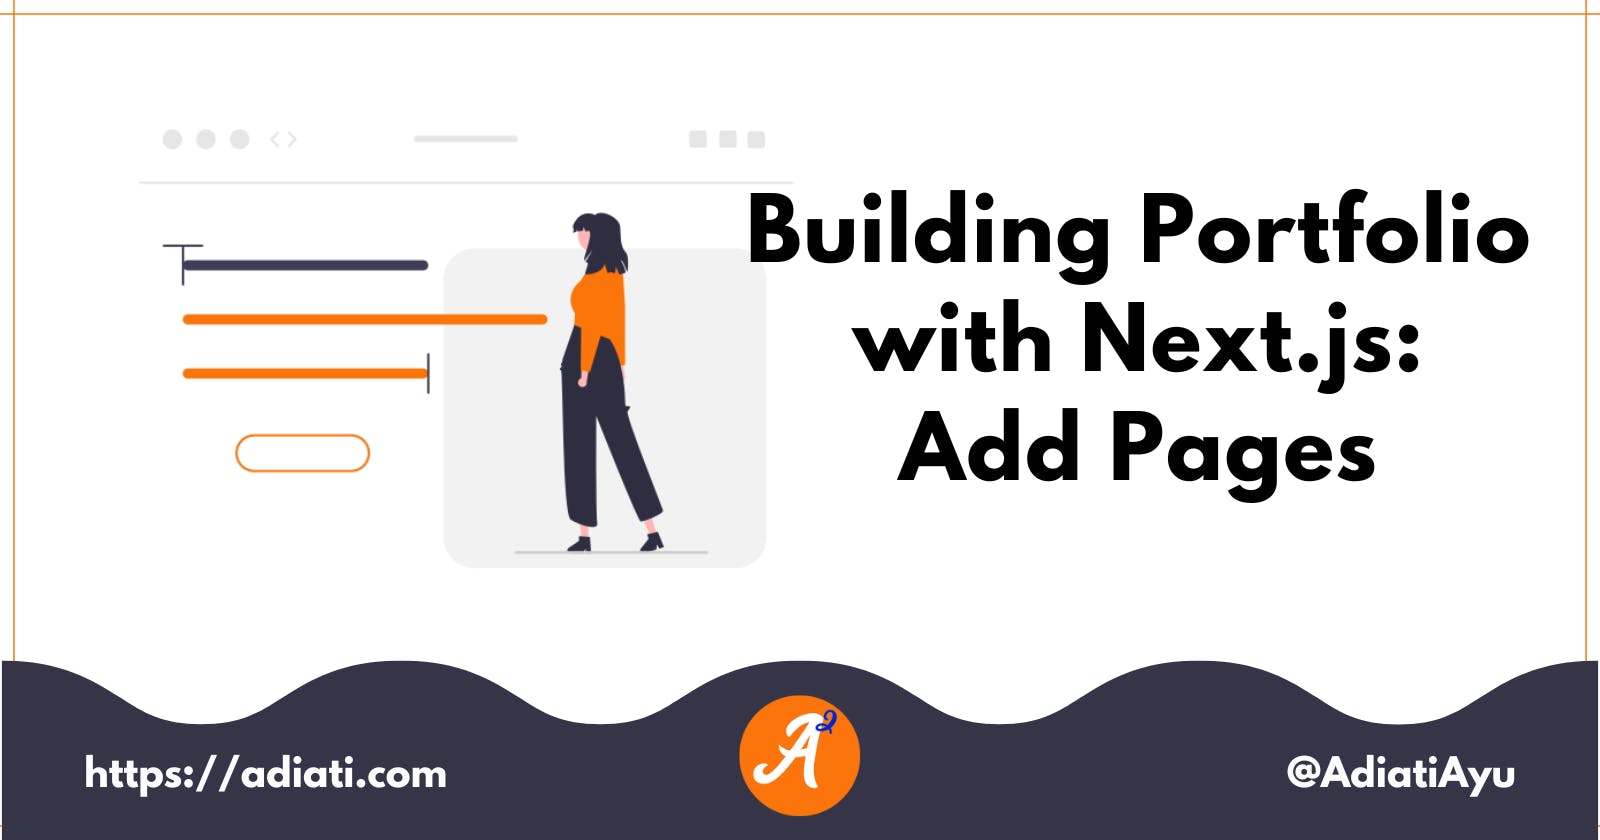 Building Portfolio with Next.js: Add Pages